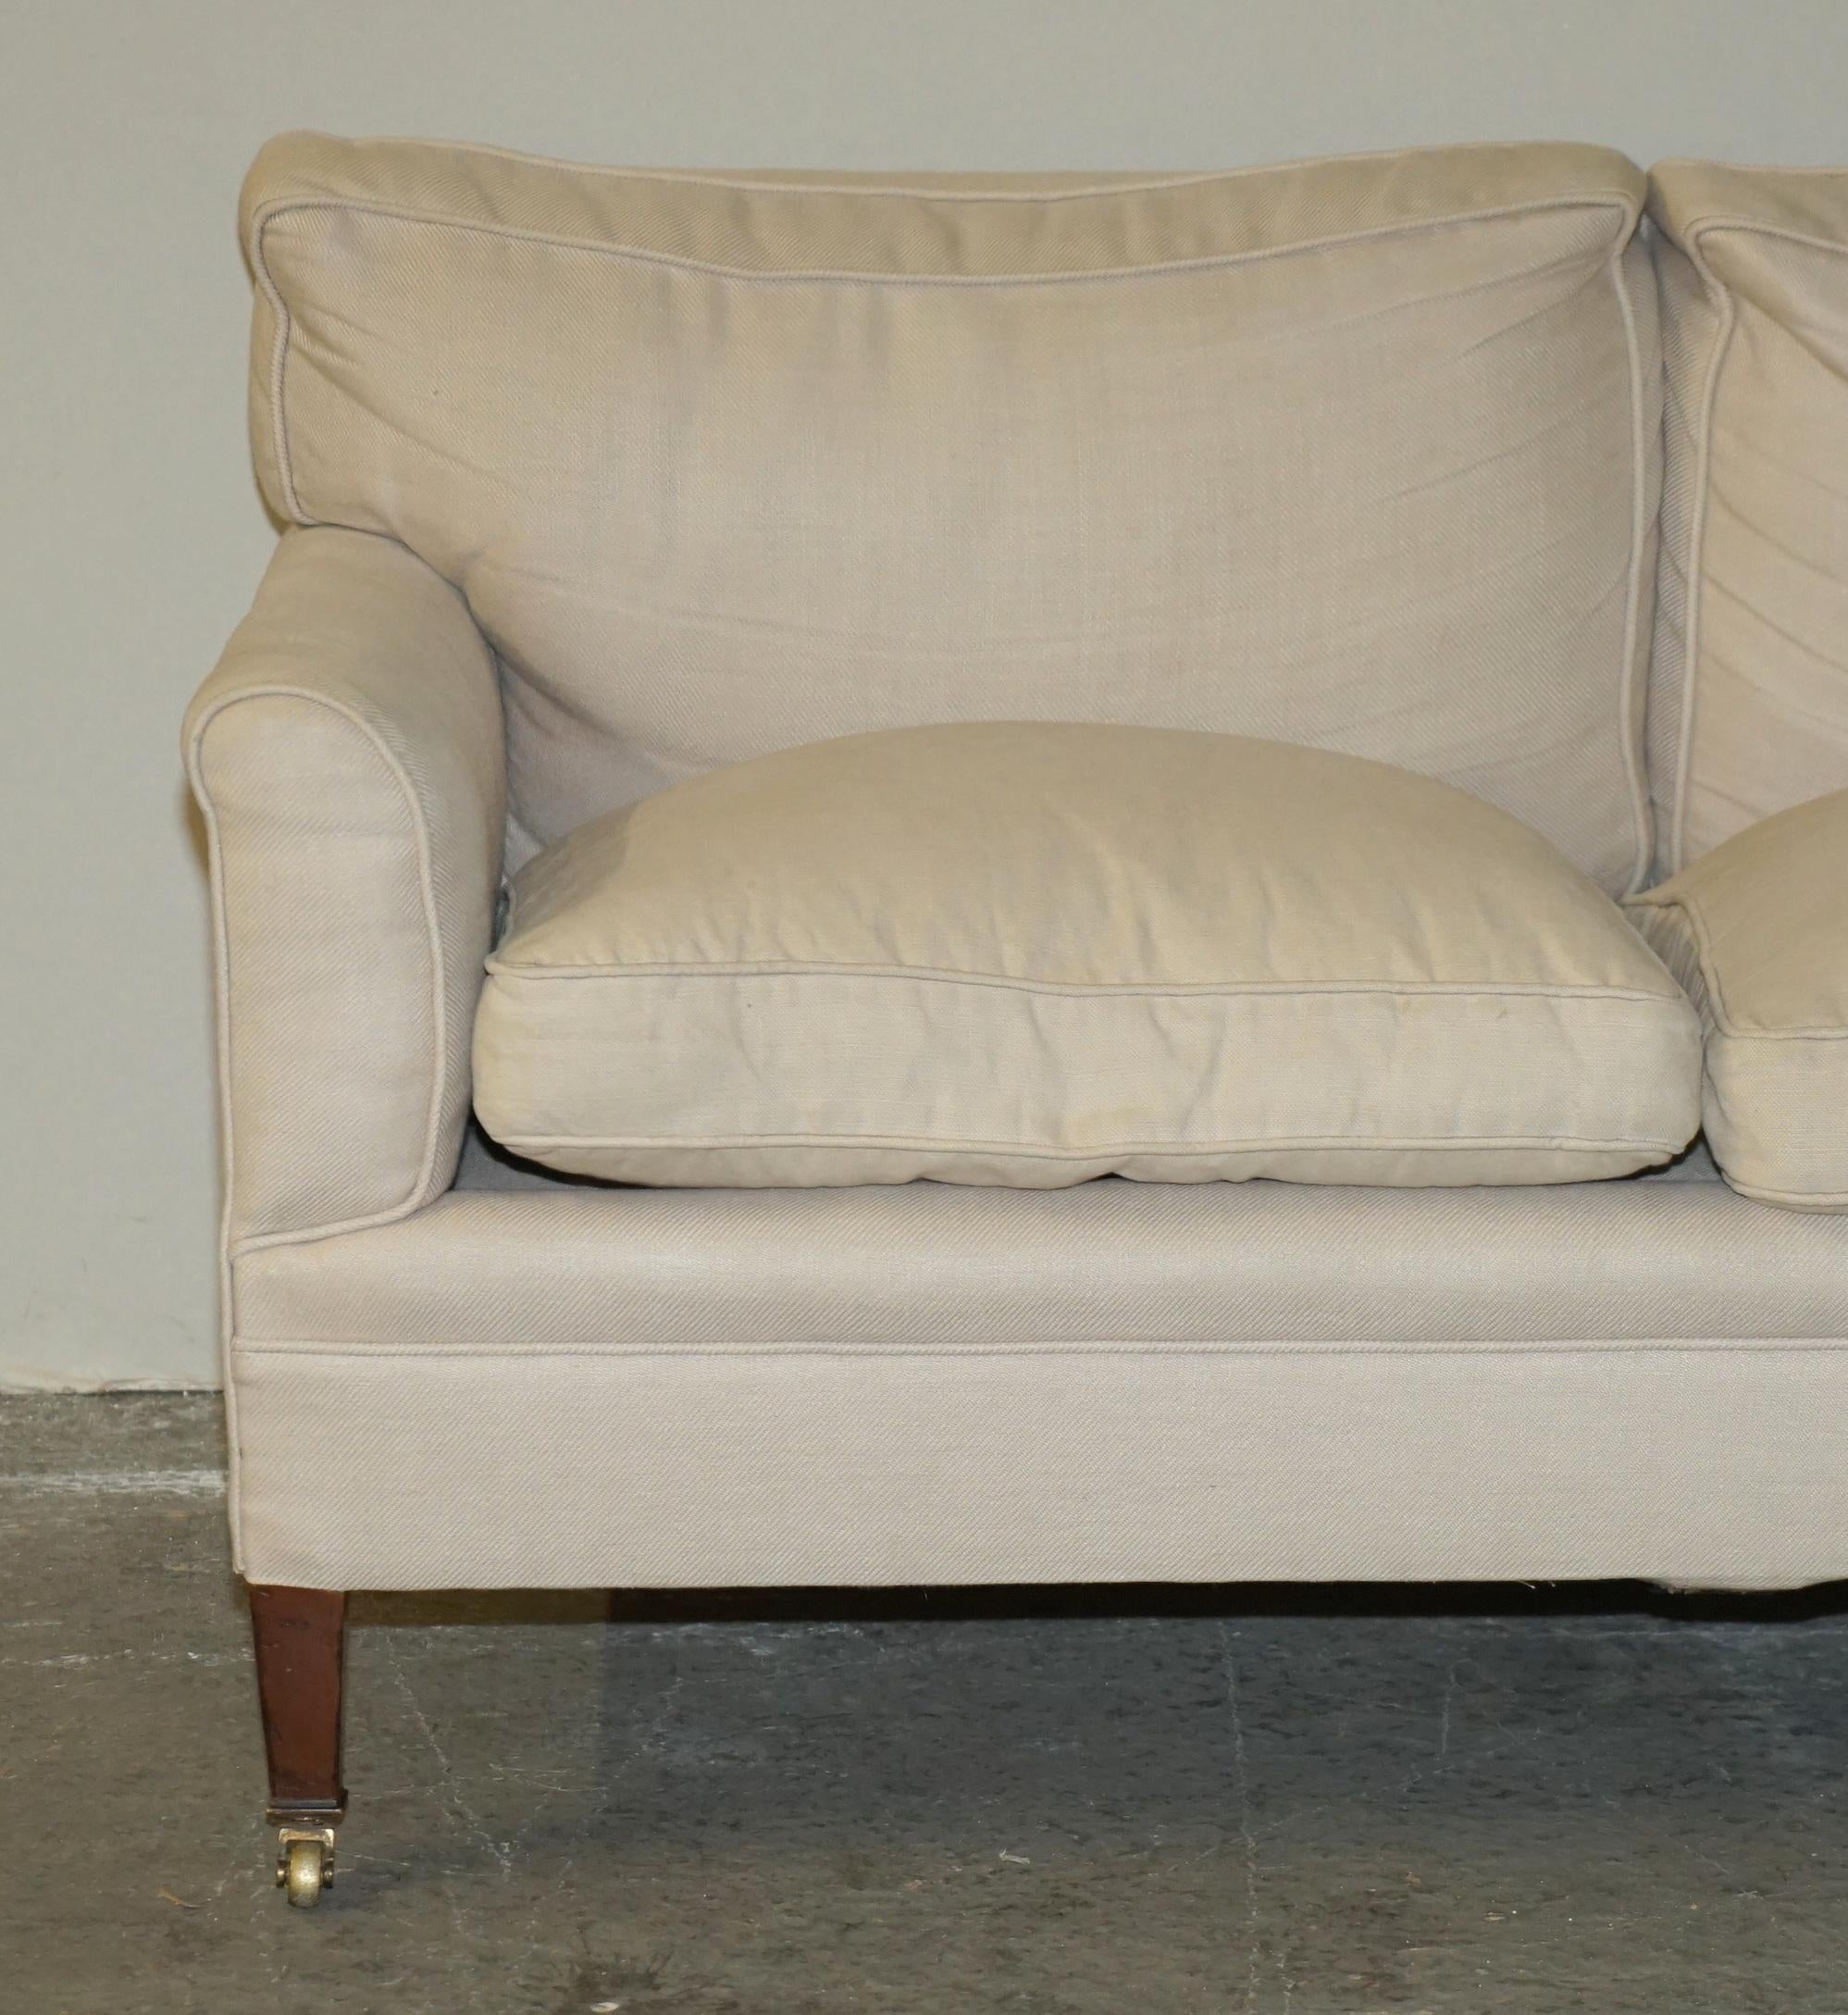 English ANTIQUE ViCTORIAN 1880 HOWARD & SON TWO SEAT SOFA STAMPED READY FOR UPHOLSTERY For Sale